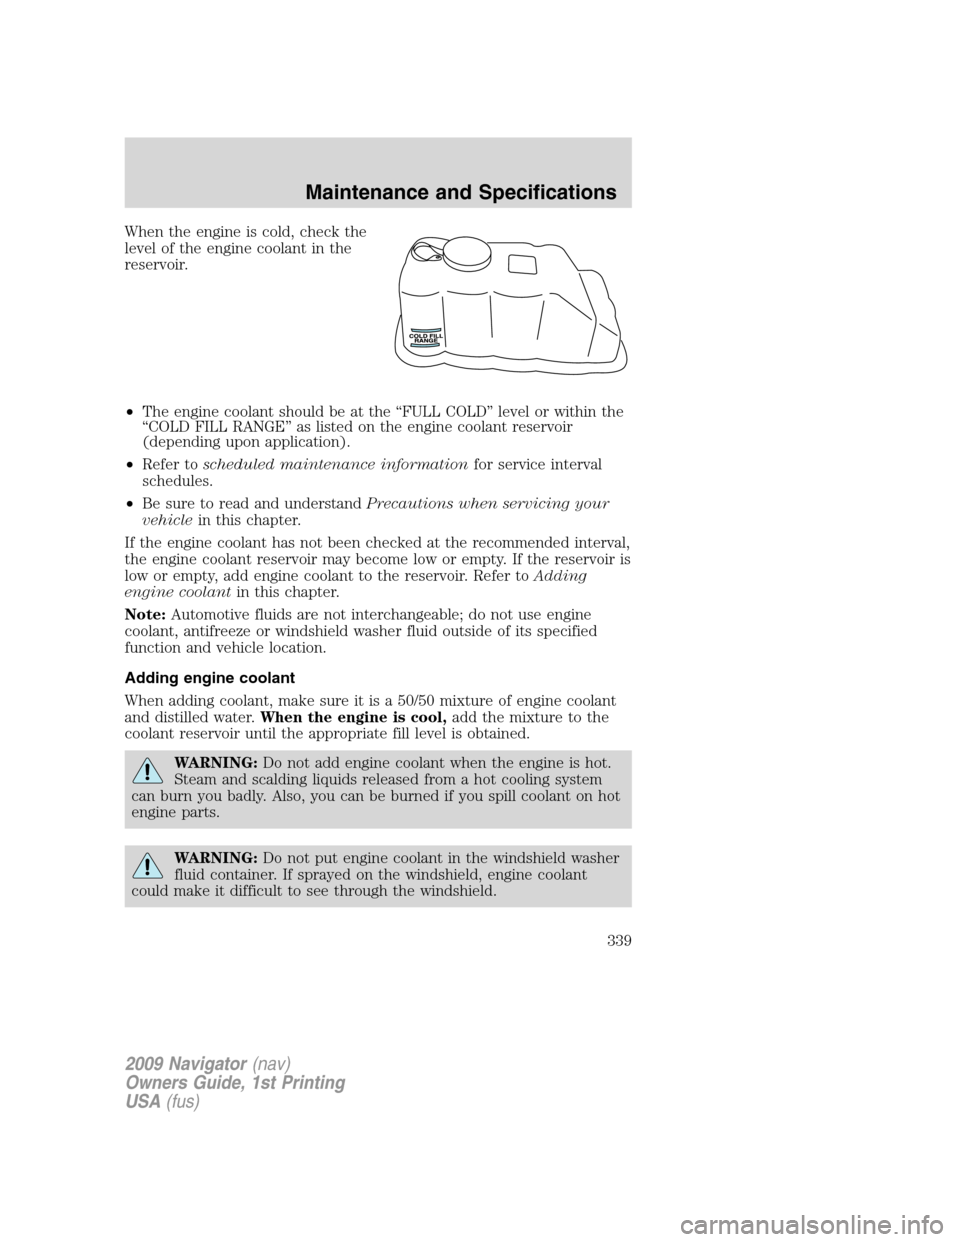 LINCOLN NAVIGATOR 2009  Owners Manual When the engine is cold, check the
level of the engine coolant in the
reservoir.
•The engine coolant should be at the “FULL COLD” level or within the
“COLD FILL RANGE” as listed on the engin